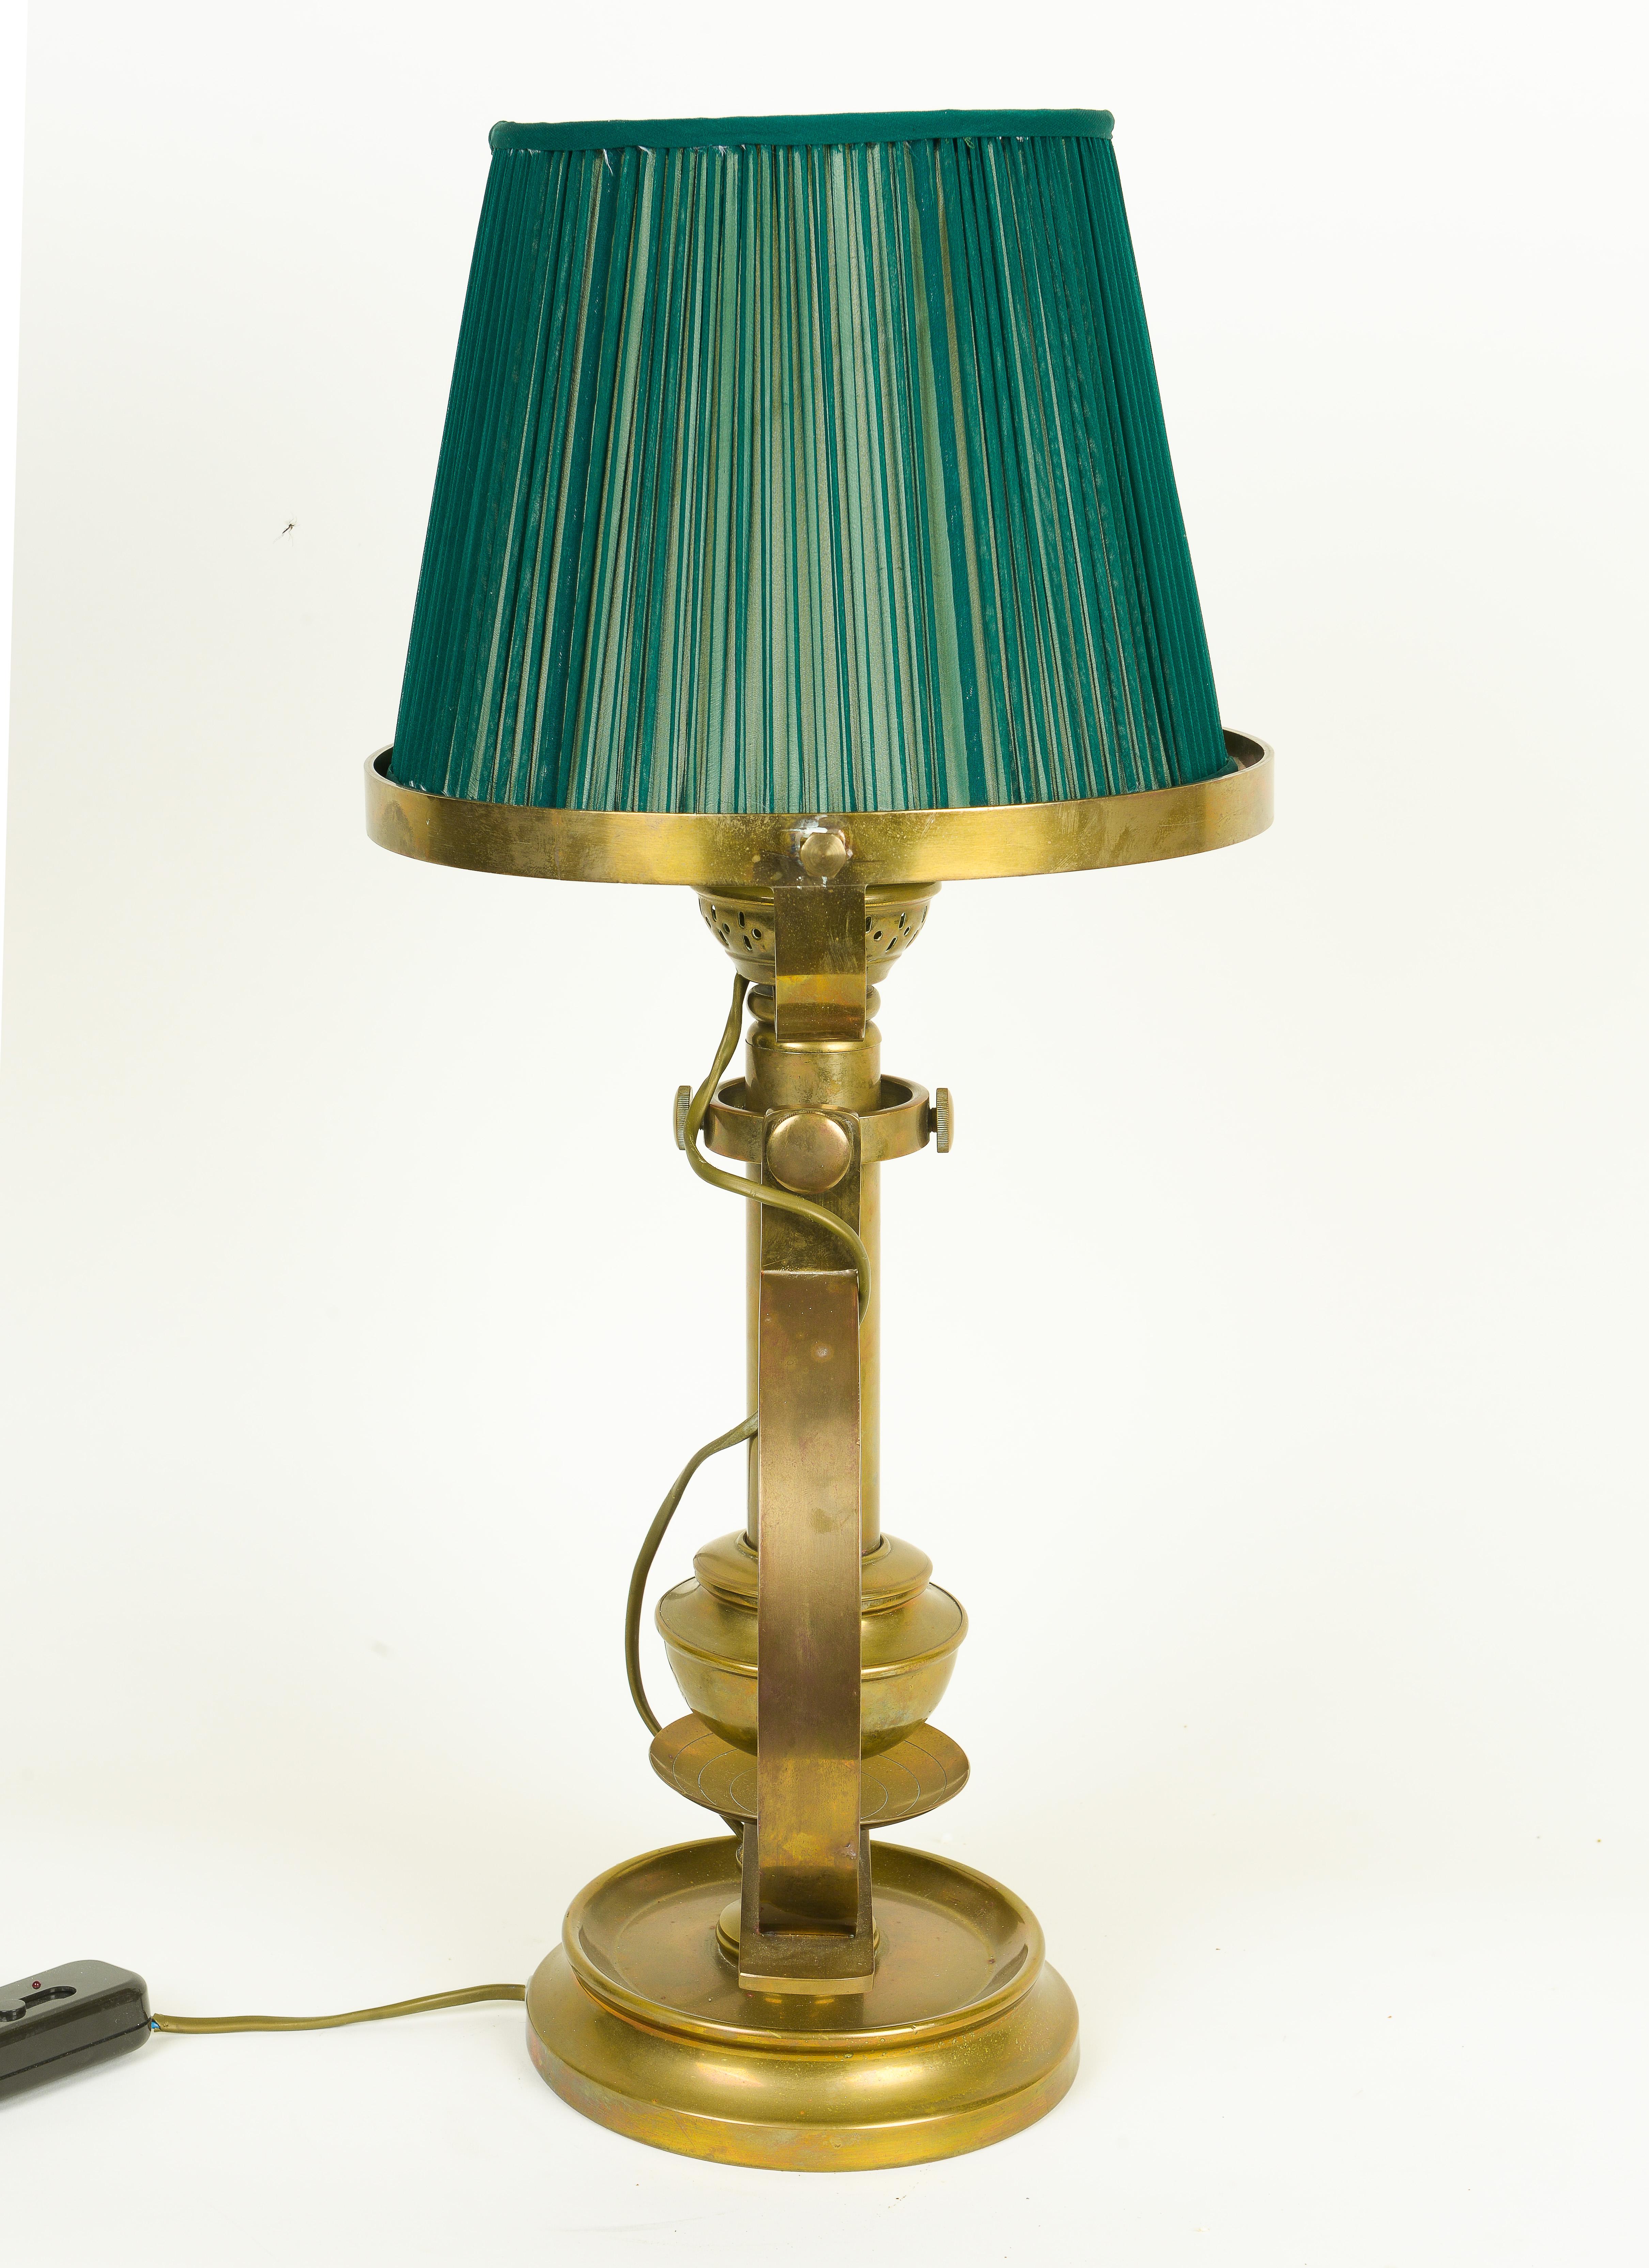 Of substantial form with brass-trimmed green silk shade; designed with a gimbal support that allows the light to stay level even when a ship pitches and rolls.